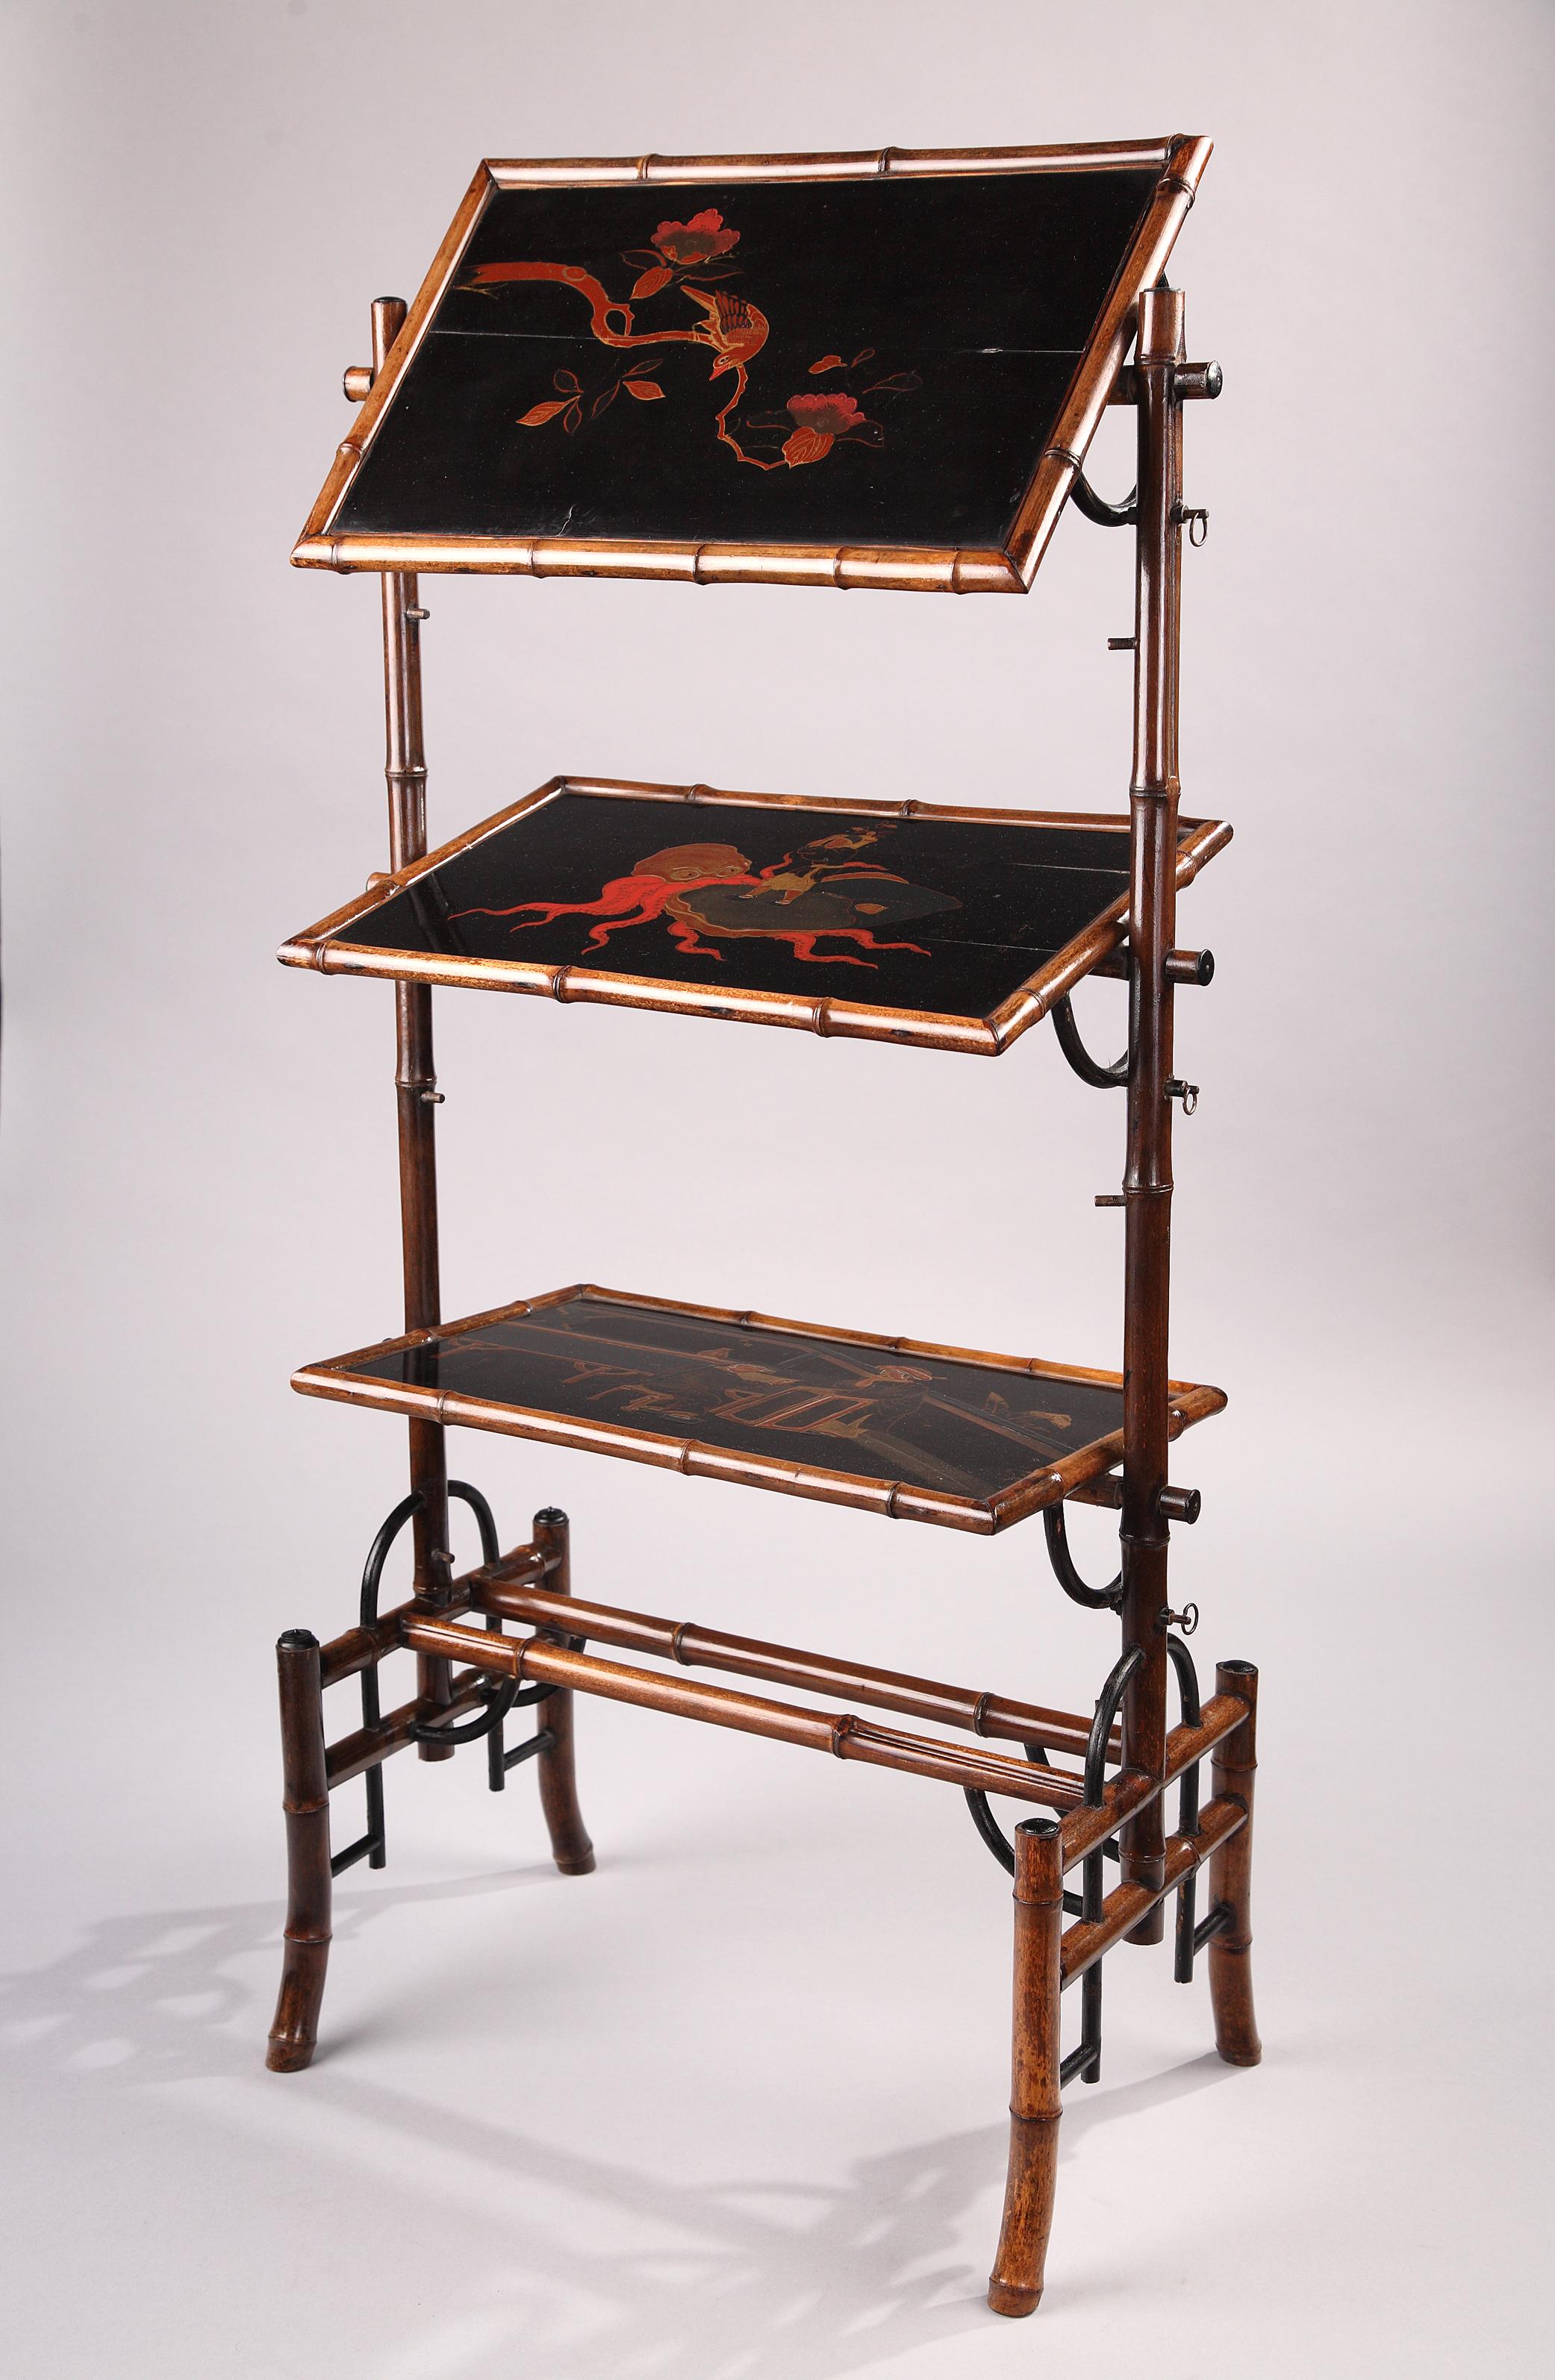 Charming Japanese style servant table executed in varnished bamboo and Japan lacquer. Made up of three rectangular rocking trays, tastefully decorated with gold-and-red motifs on a black background, depicting a bird on a branch, an octopus with a